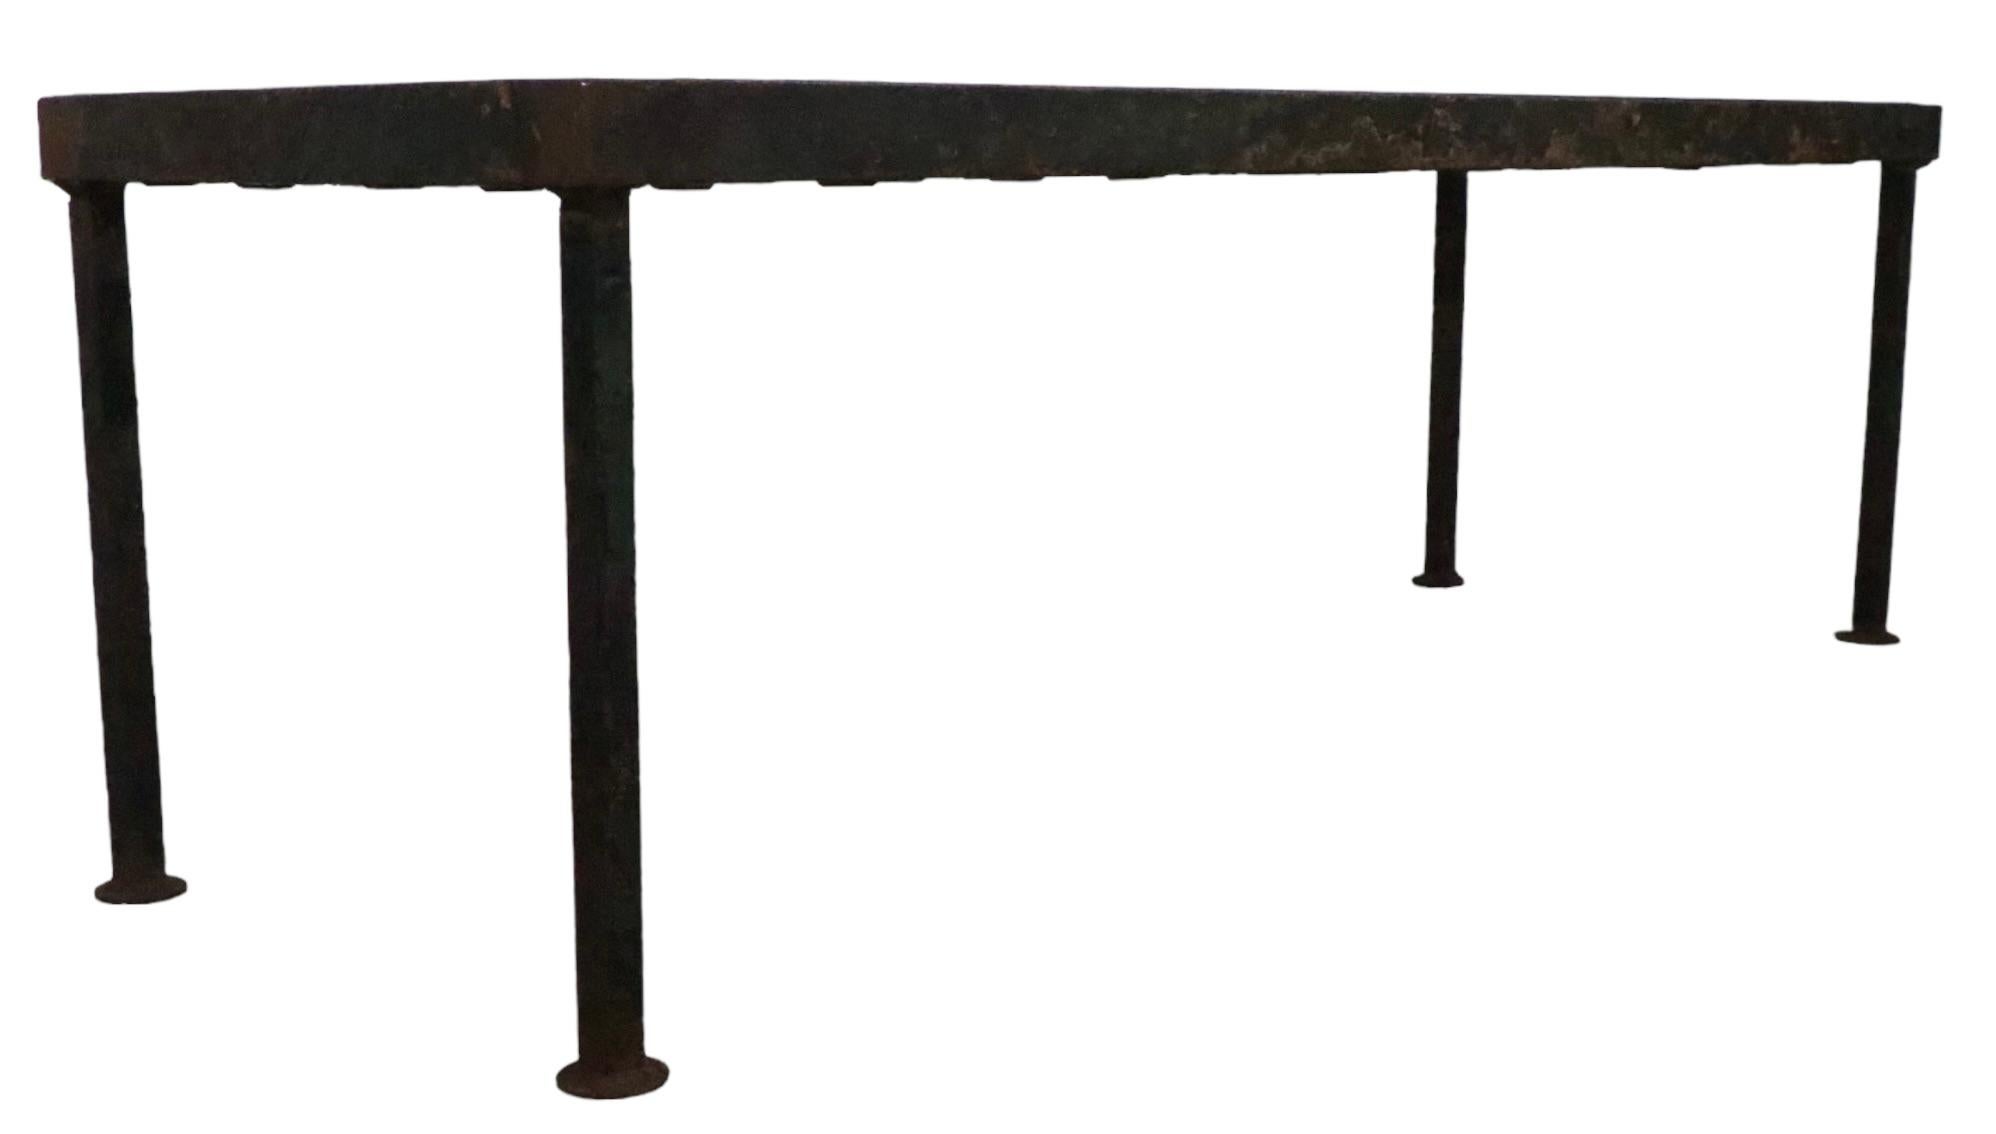 American Iron and Glass Coffee Table created from a decorative  architectural iron panel